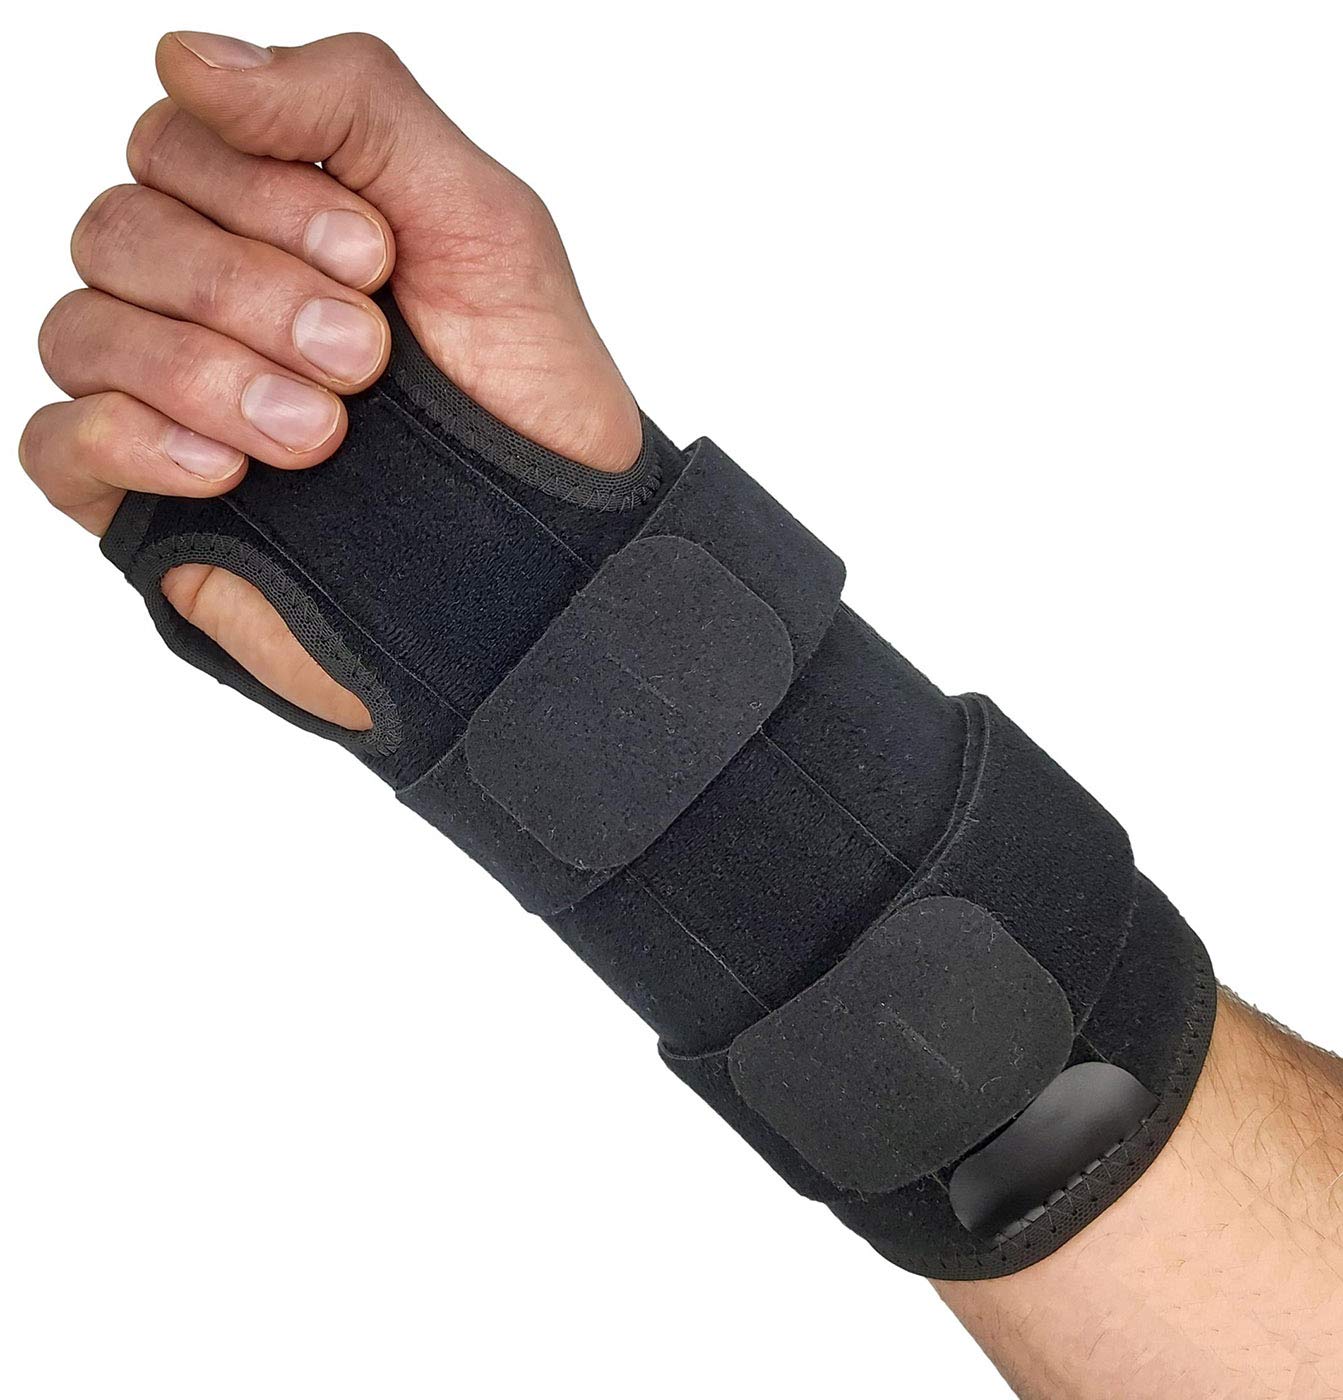 Wrist Brace For Carpal Tunnel Relief Reversible Hand or Wrist